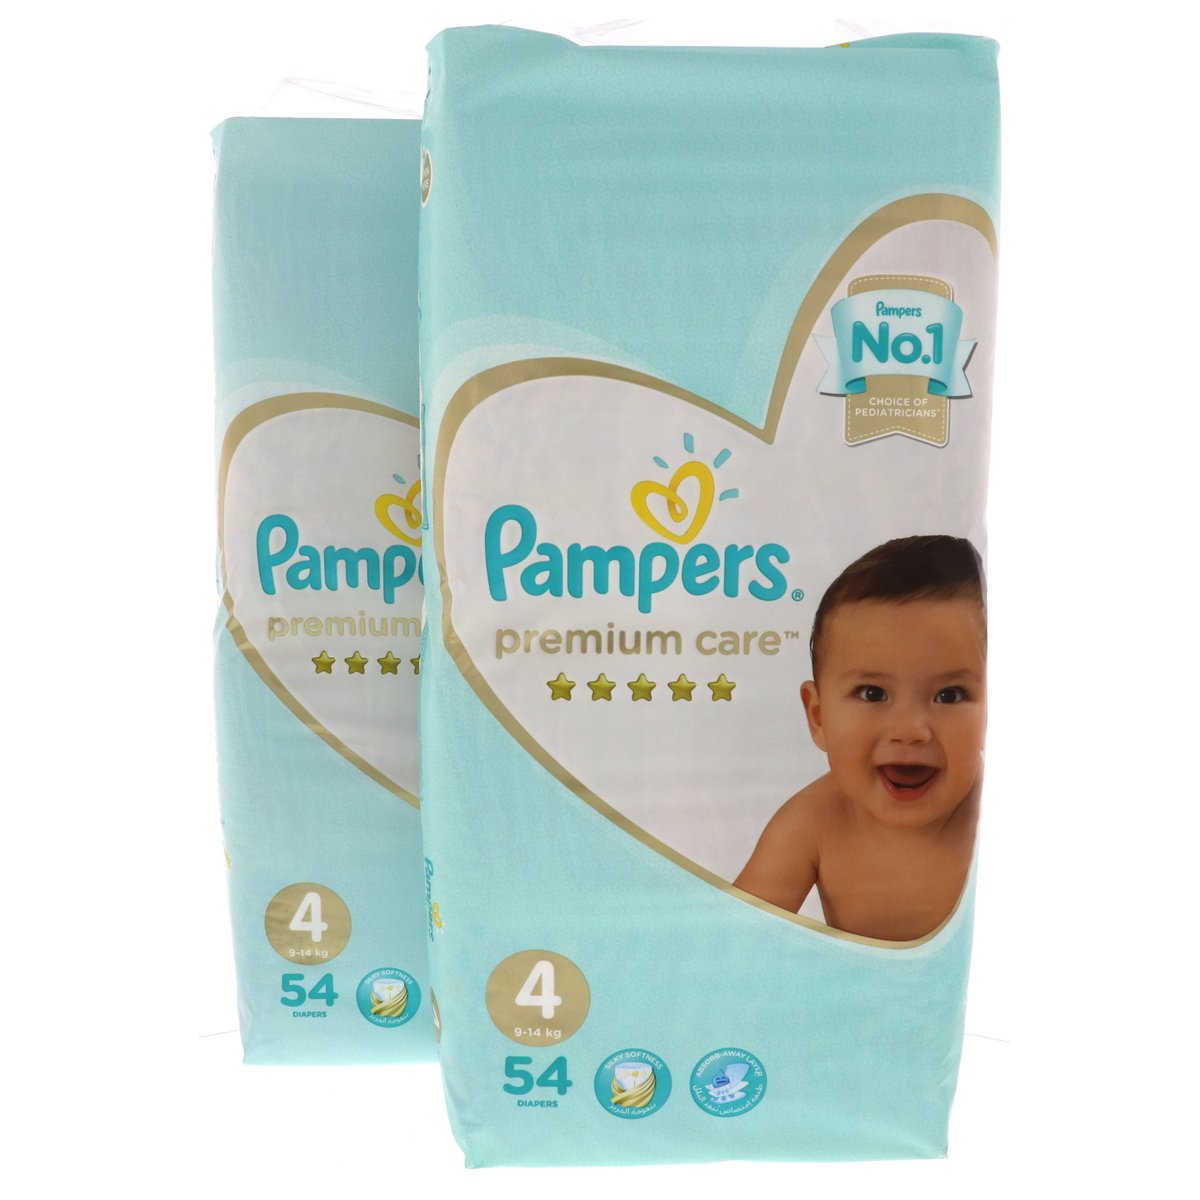 Pampers Premium Care Size 4, 9-14Kg, 2 x 54Diapers